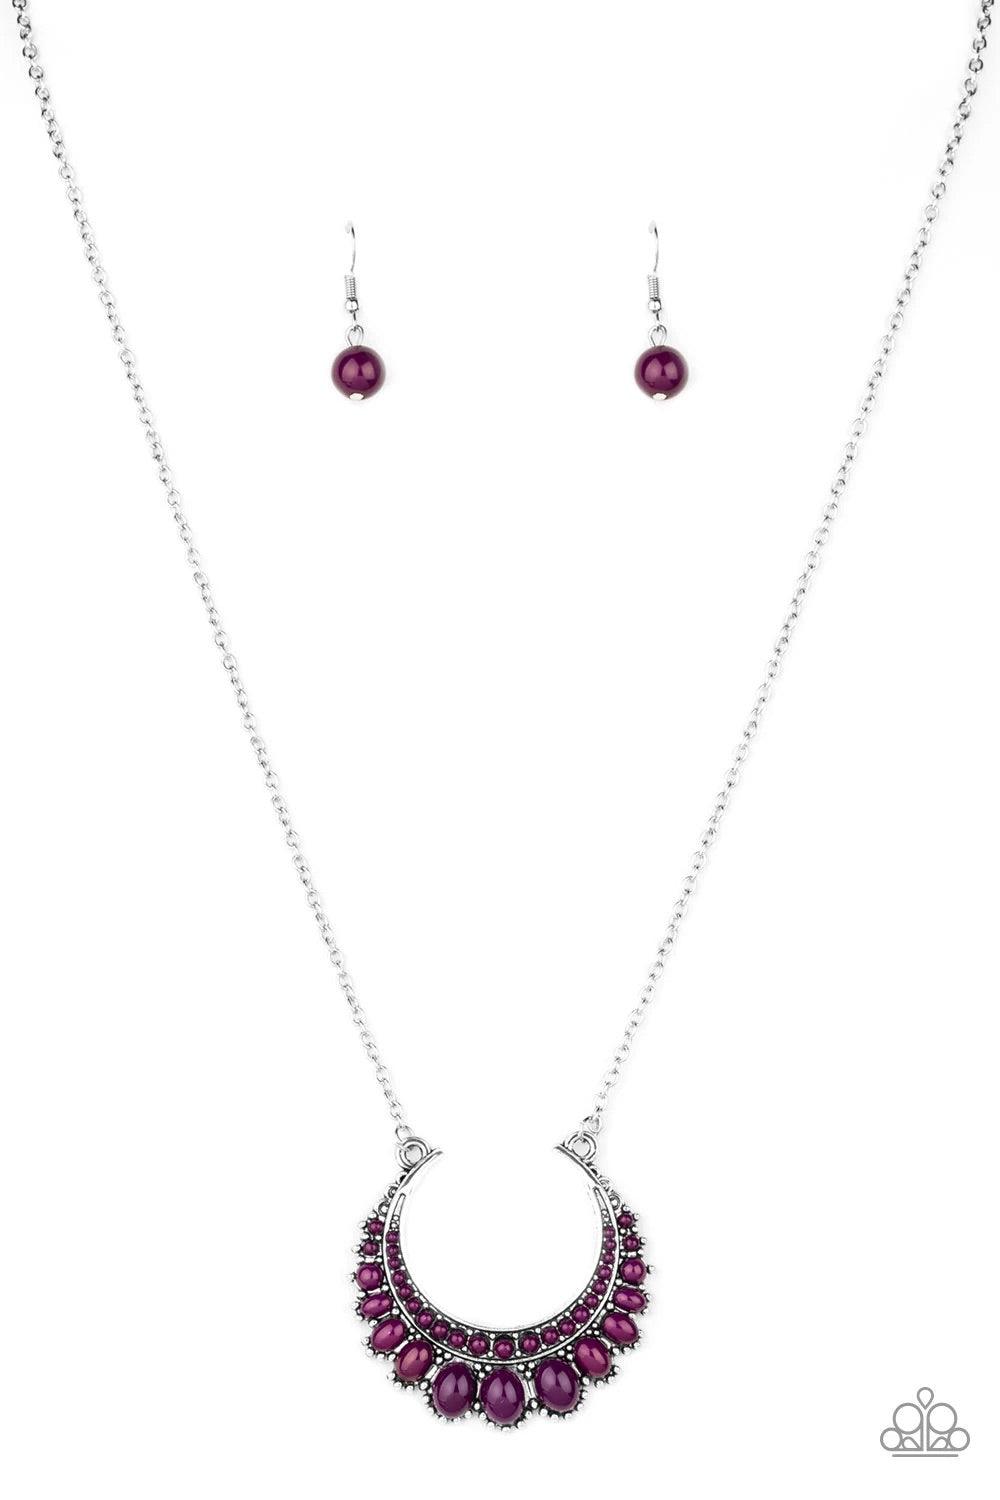 Paparazzi Accessories Count To Zen A- Purple Gradually increasing in size towards the center, dainty purple beads are encrusted along the center of a silver crescent frame. Purple beads flare out from the bottom of the shimmery silver frame, creating a bo